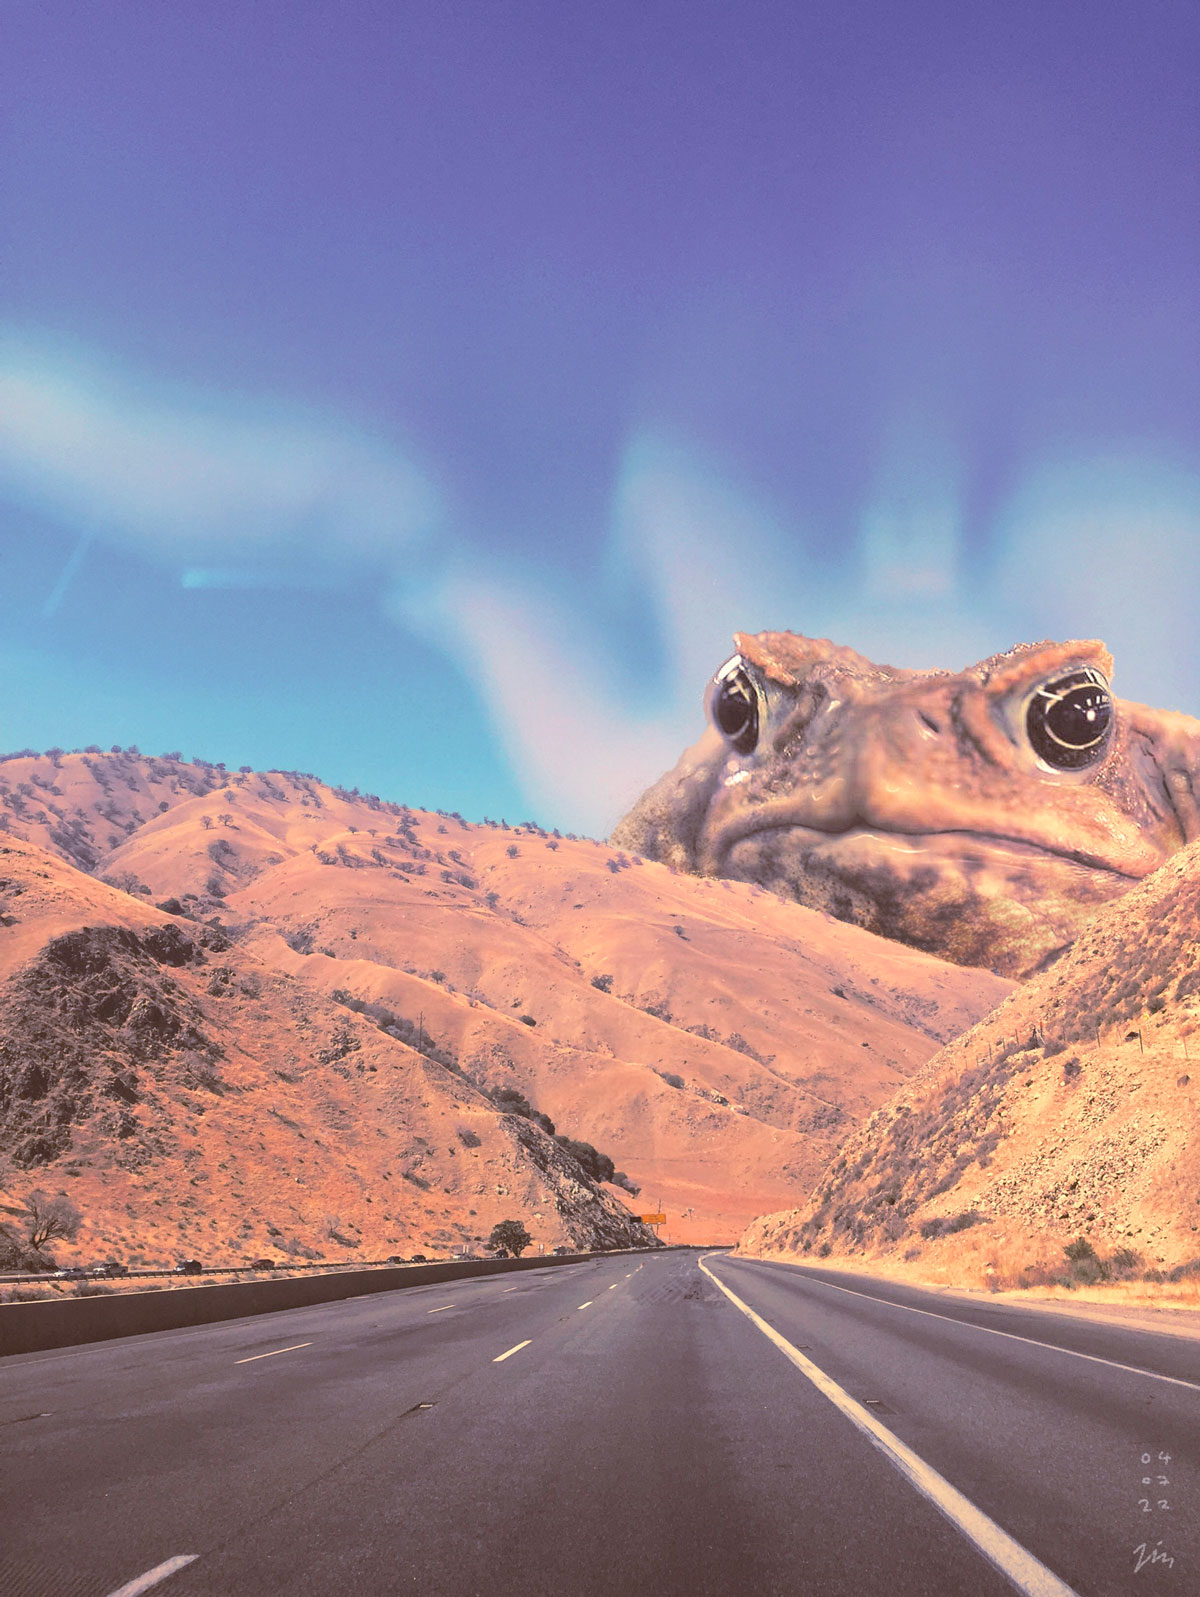 He Angy, a surreal photo collage featuring a enormous toad looming over a mountainous freeway by Liz Broekhuyse